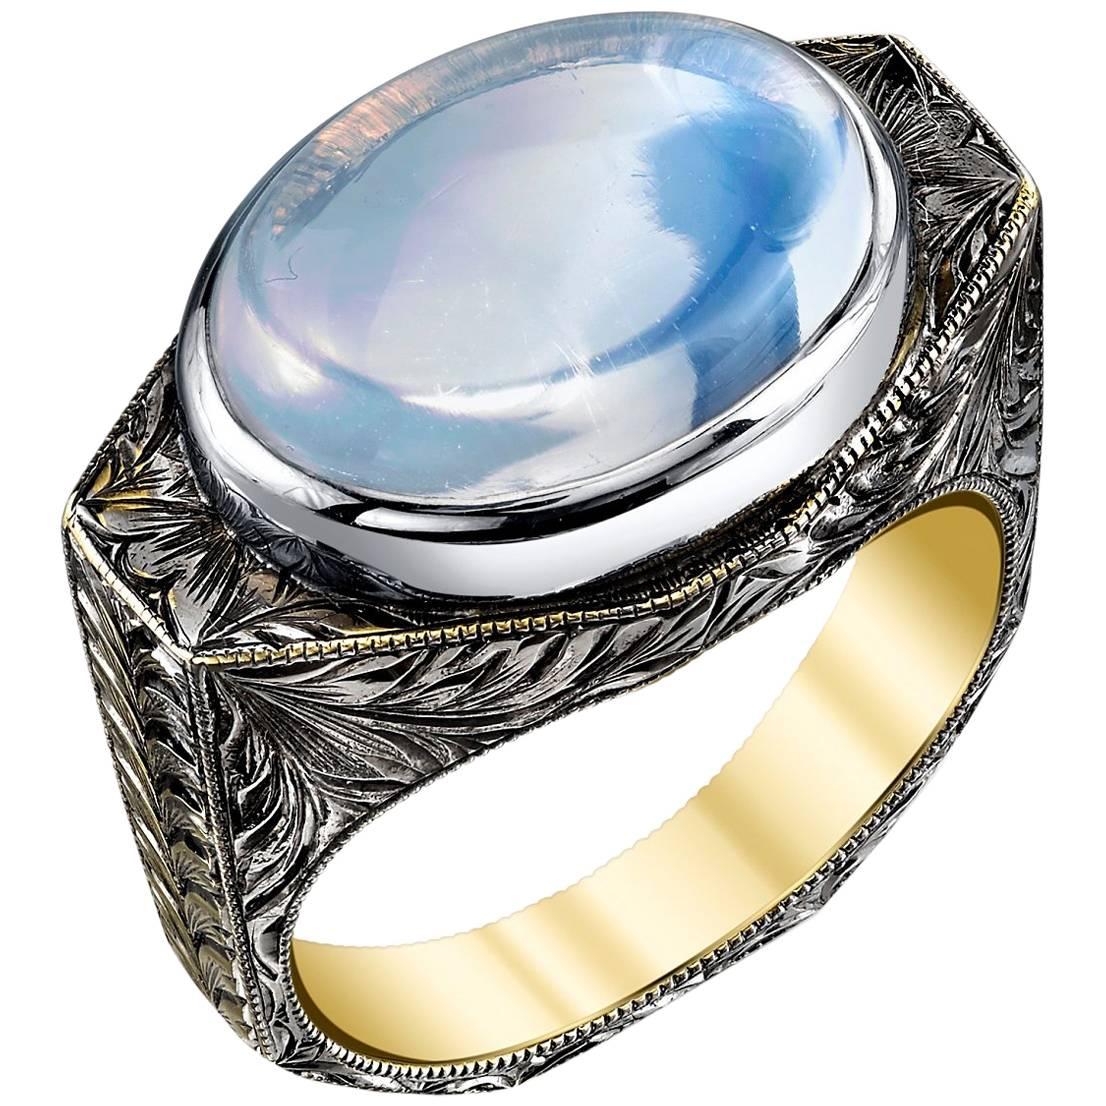 6.11 Carat Moonstone Ring in 18k Gold with Antiqued Black Rhodium Finish For Sale